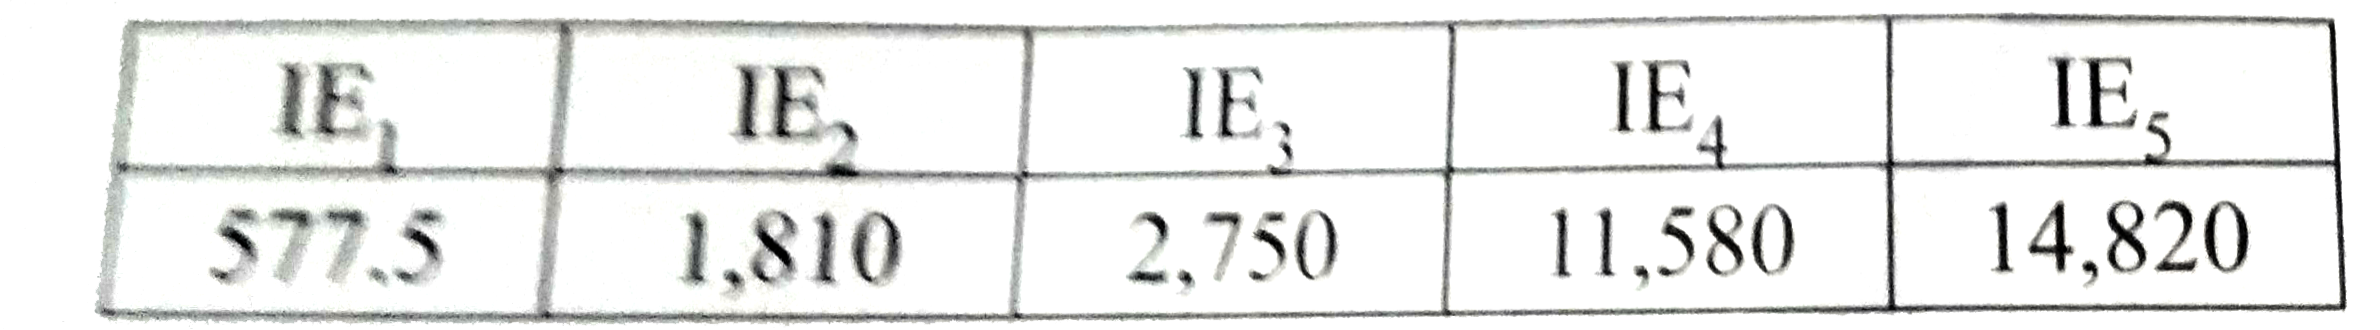 Various successive ionization enthalpies (in kJ mol^(-1)) of an element are given below:           The element is